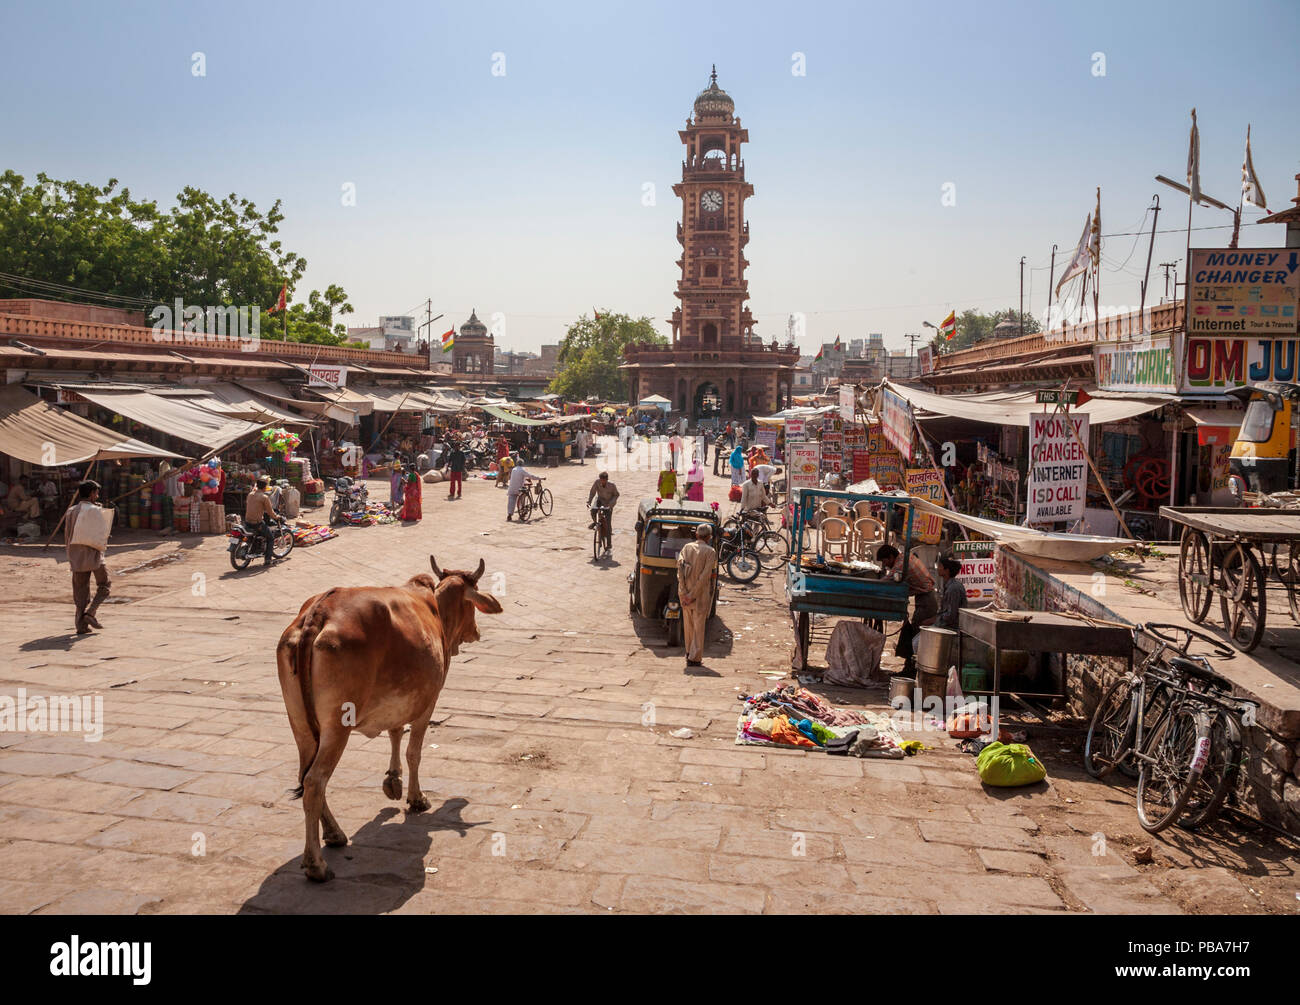 A sacred cow at Sardar Bazaar with the Clock tower in the distance, Jodhpur, India Stock Photo